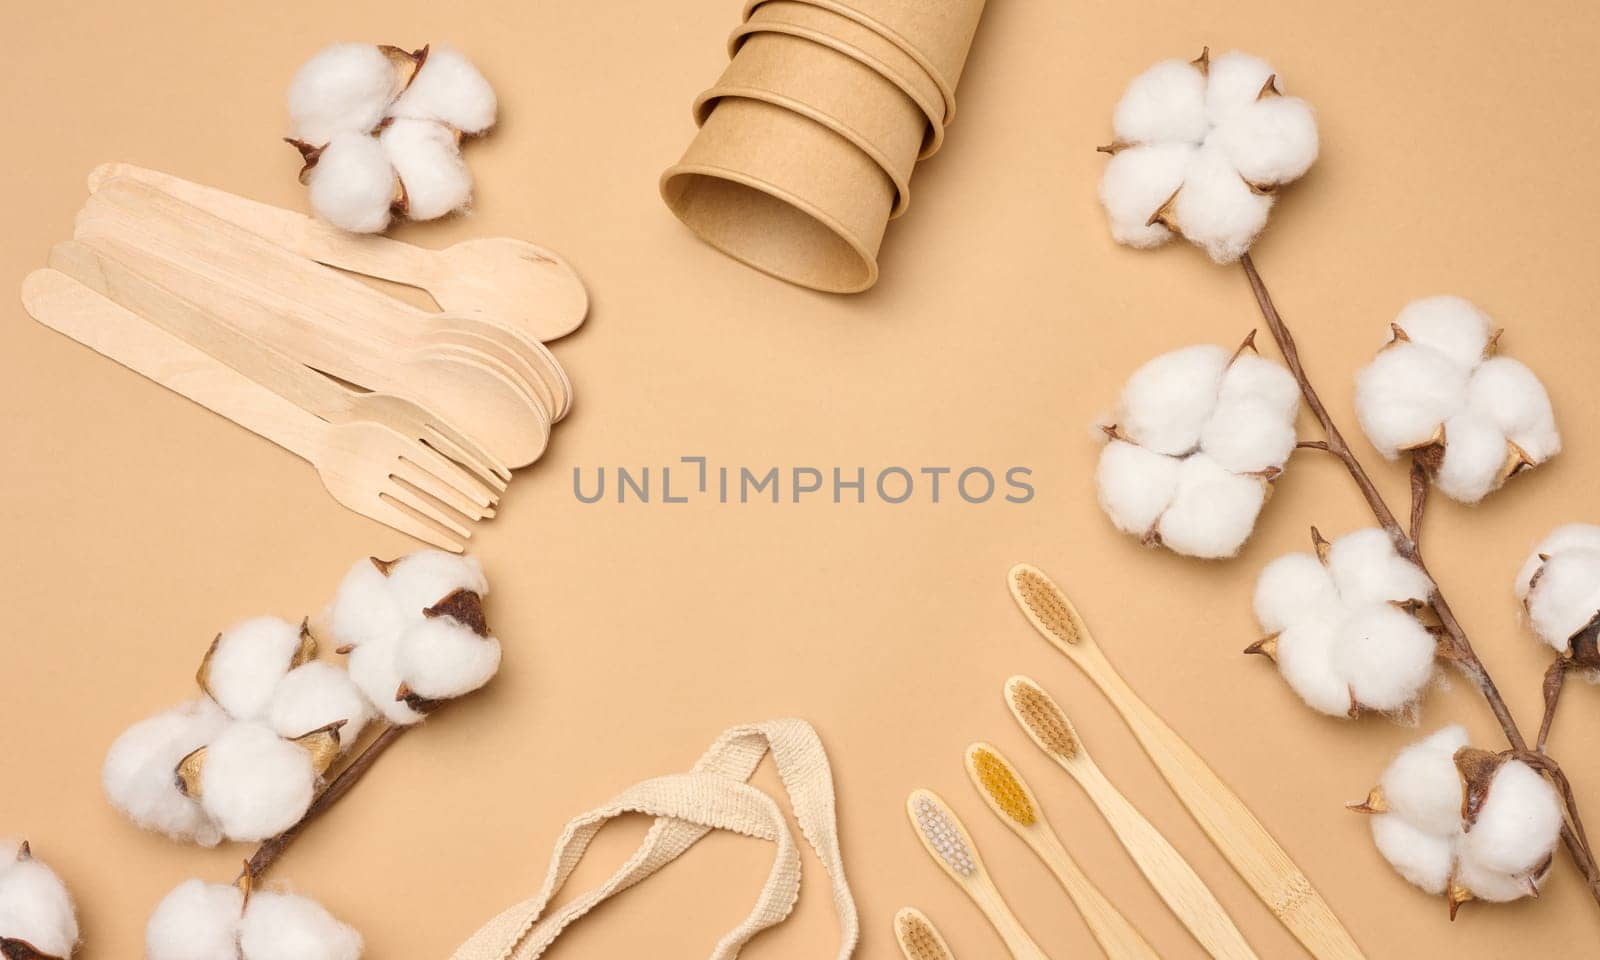 Cotton bag, wooden spoon and cups on a brown background. Waste recycling concept, zero waste